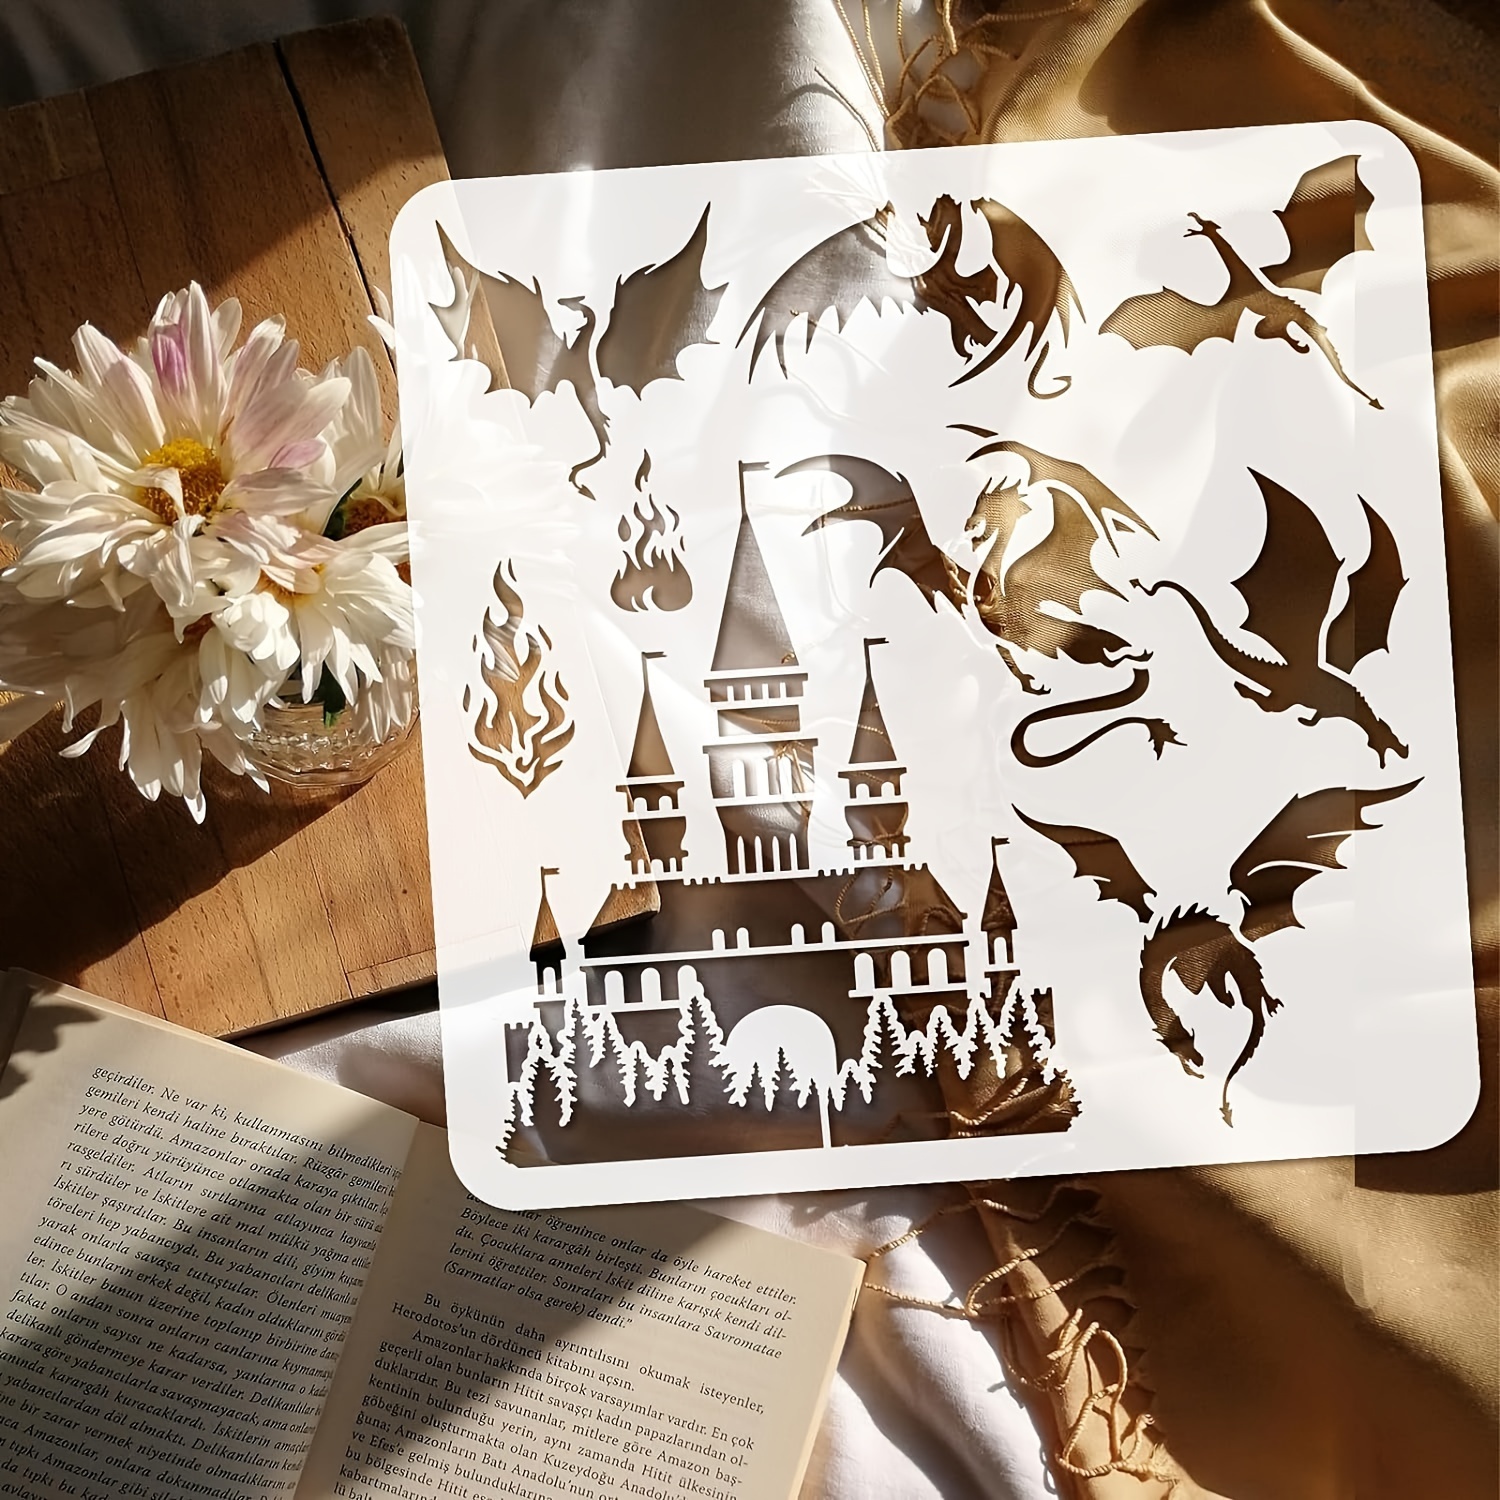 

1pc Dragons Stencil 11.8x11.8 Inch Castle Painting Stencil Plastic Western Dragon Fire Castle Patterns Stencil Template Reusable Diy Art And Craft Pterosaur Stencil For Home Wall Decor